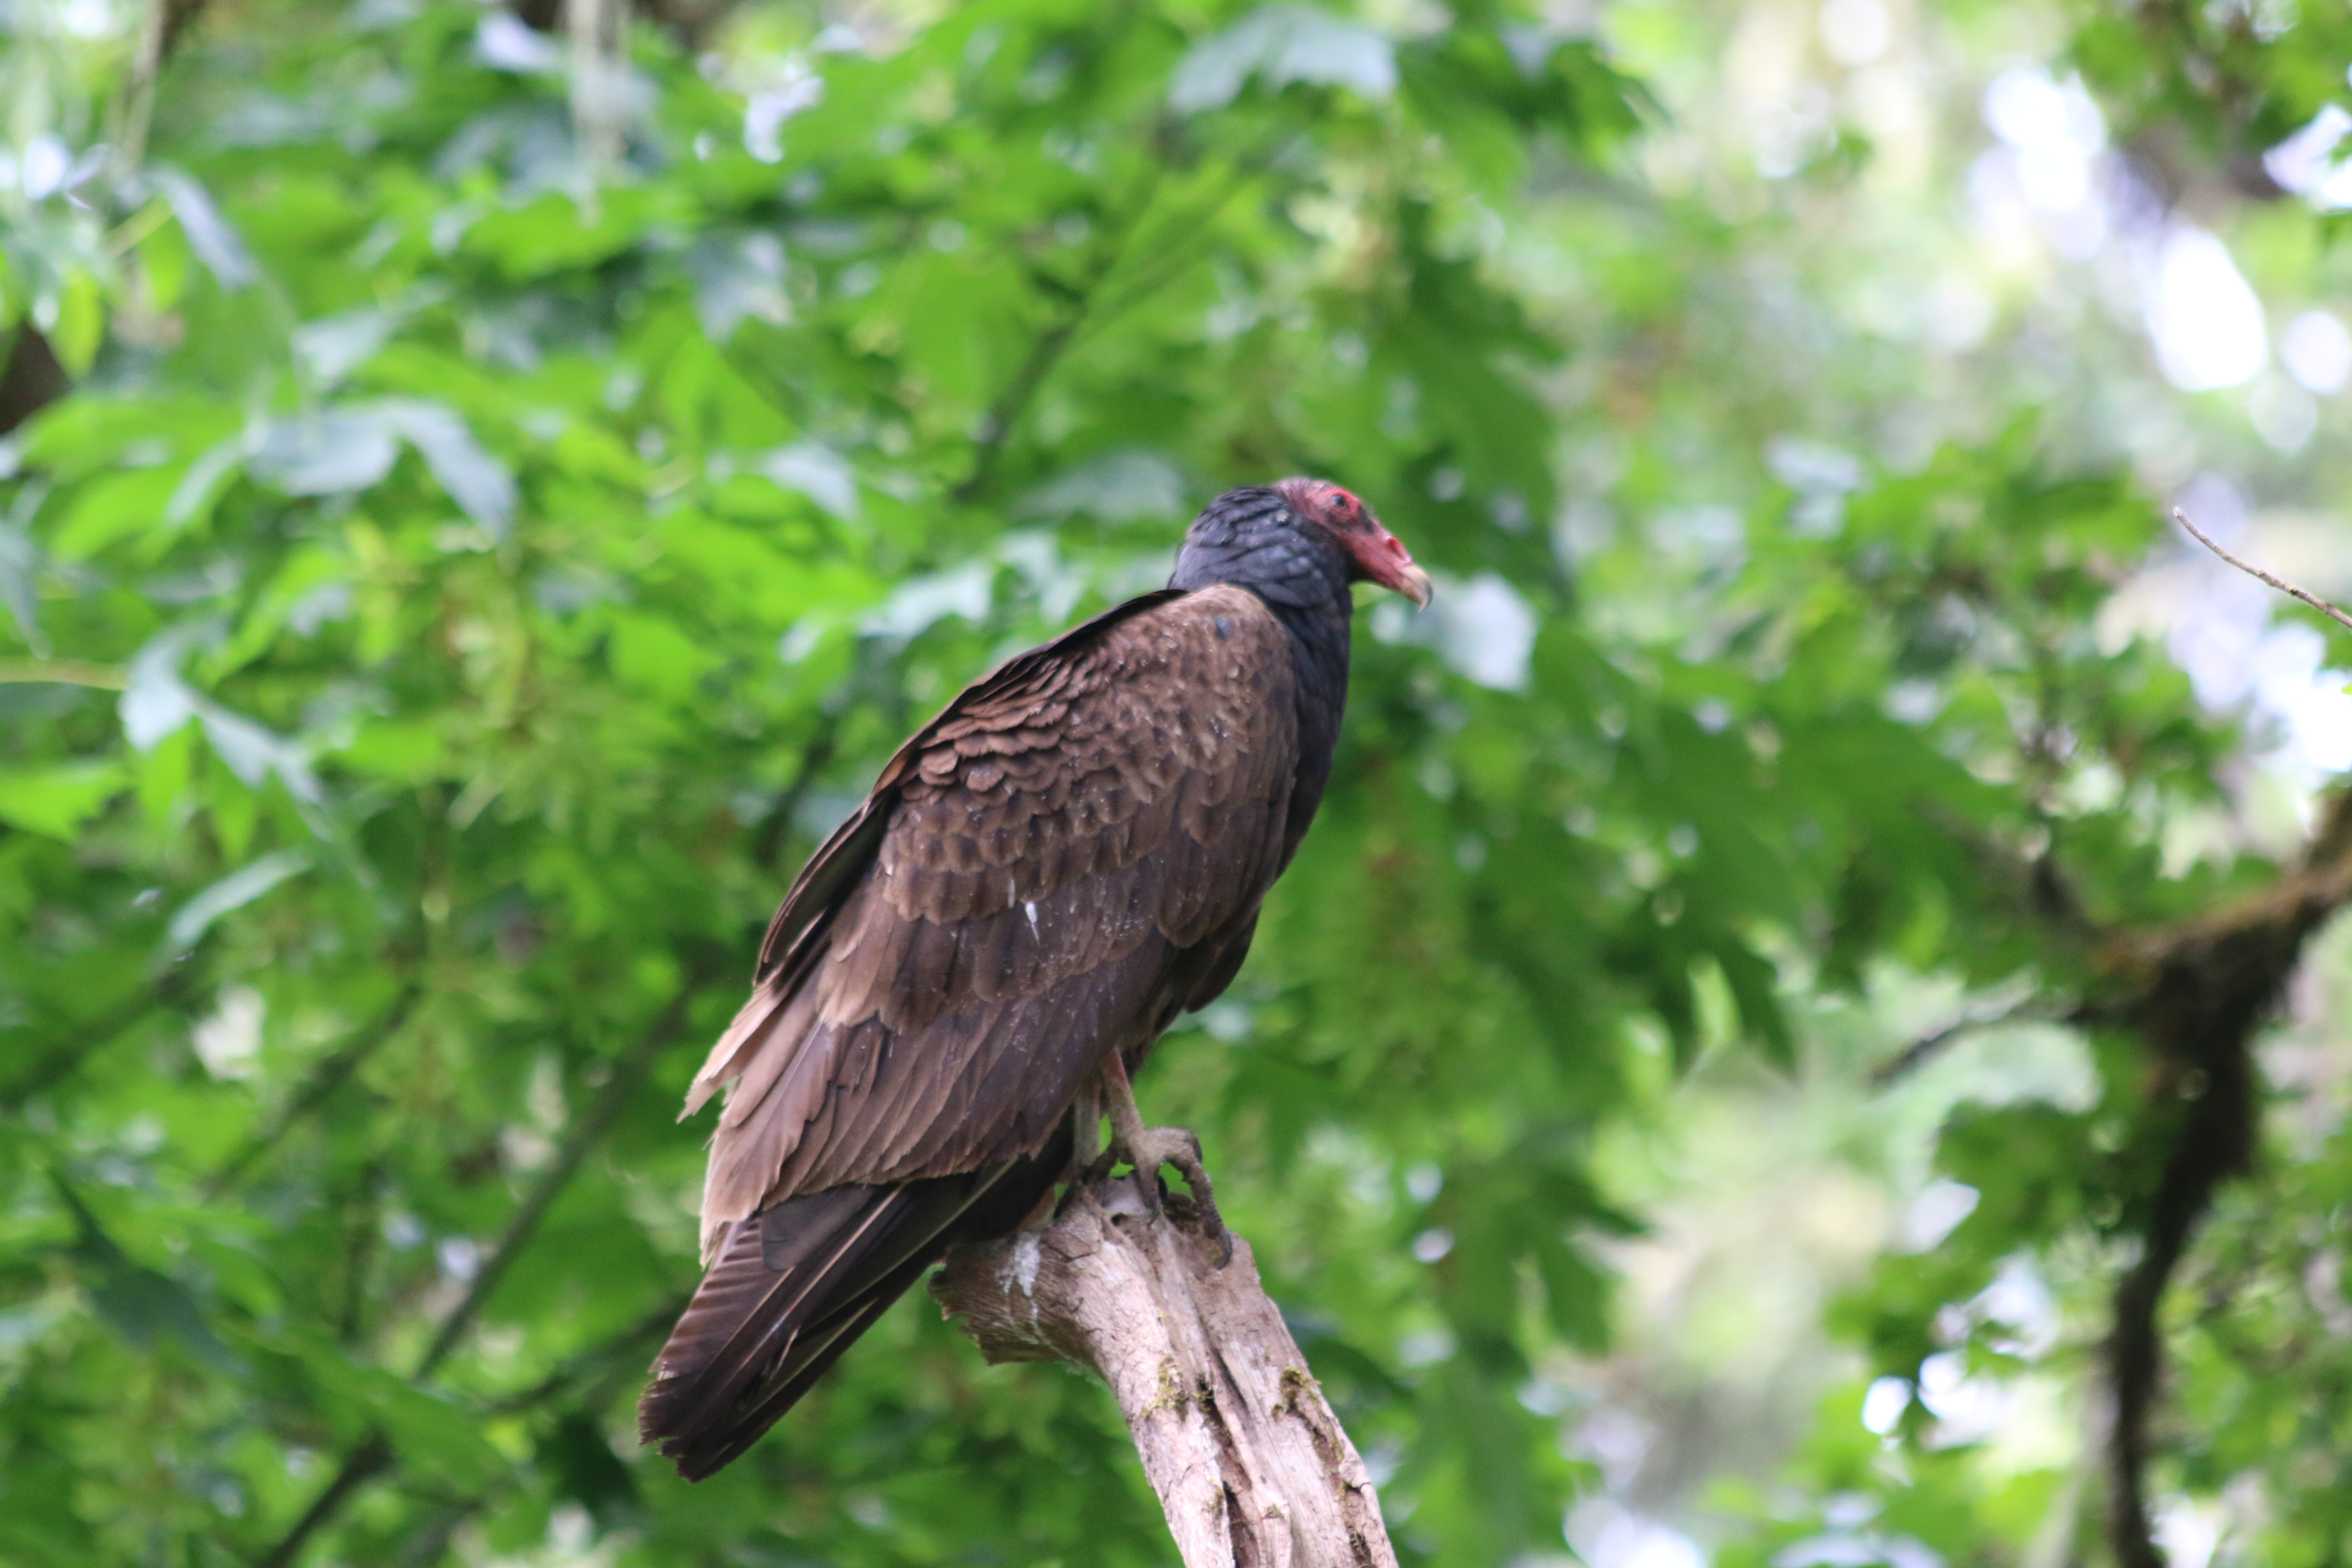 A vulture perched on a dead branch.